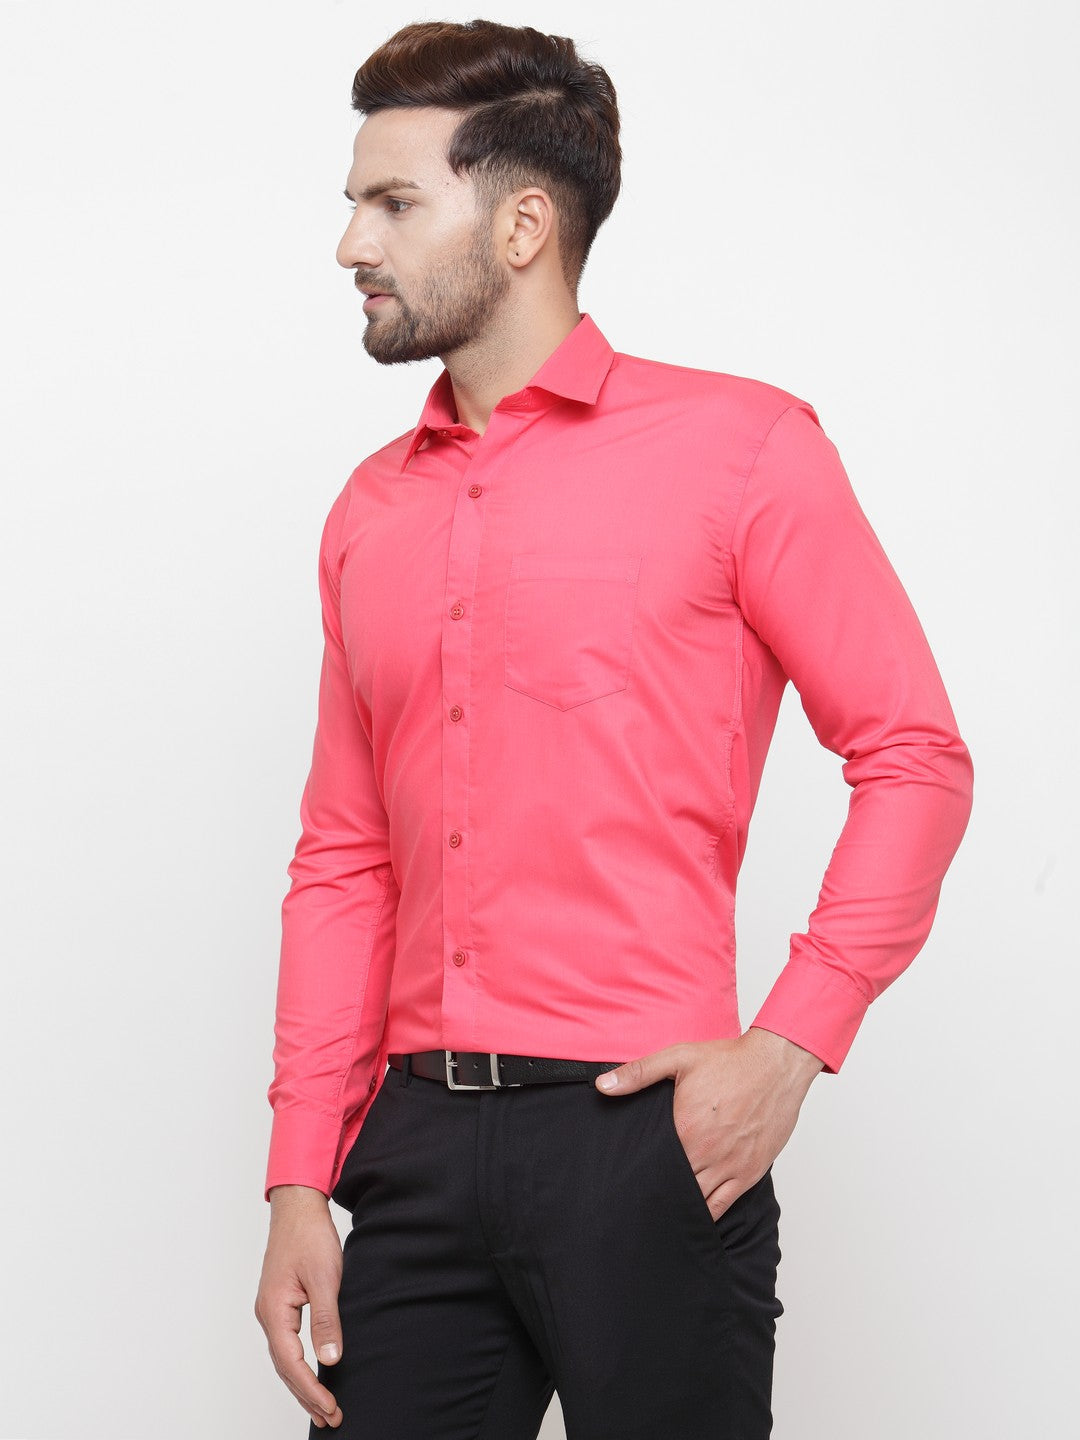 Men's Cotton Solid Coral Red Formal Shirt's ( SF 361Coral ) - Jainish